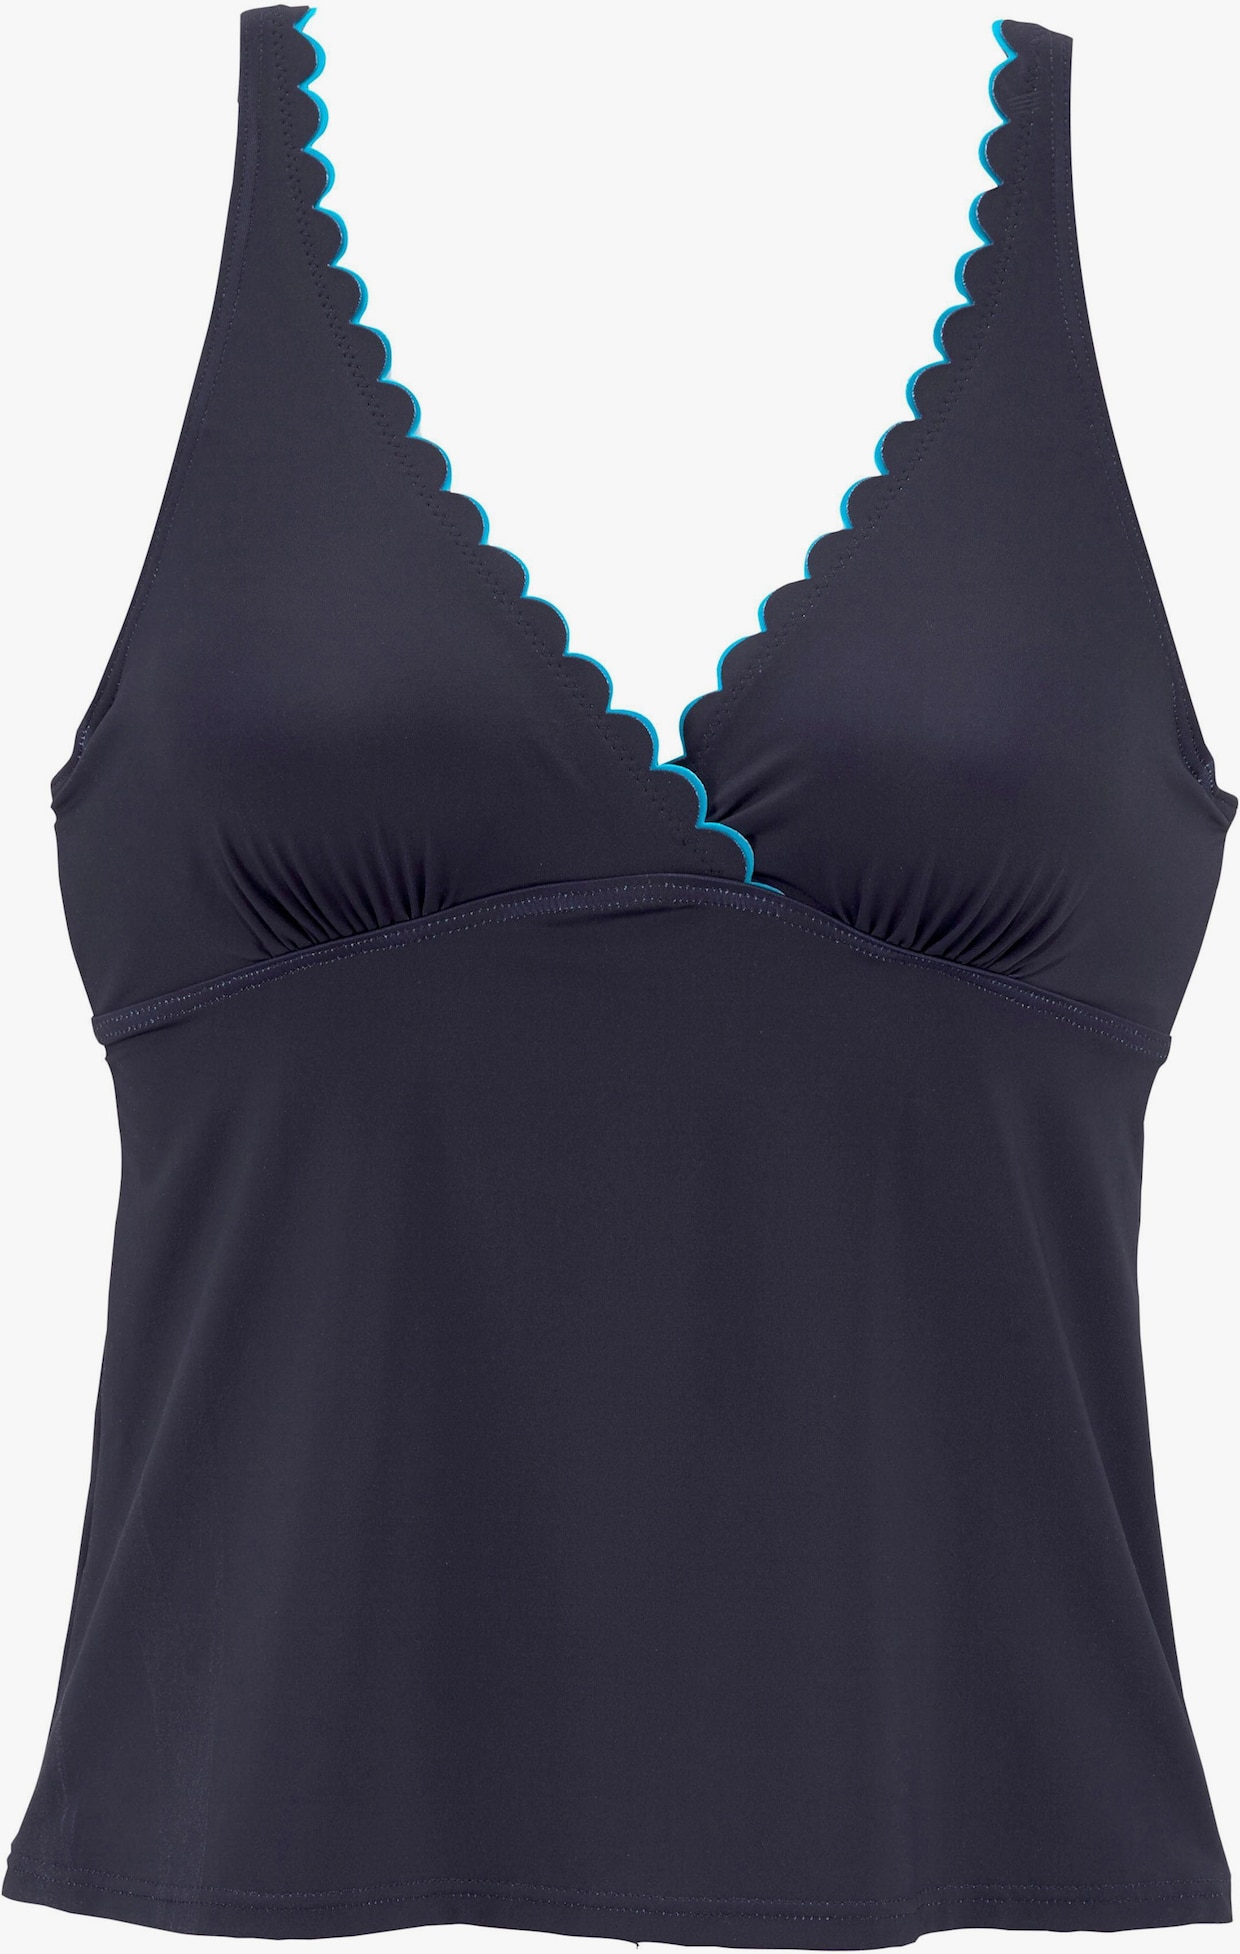 LASCANA Beugeltanktop - navy/turquoise